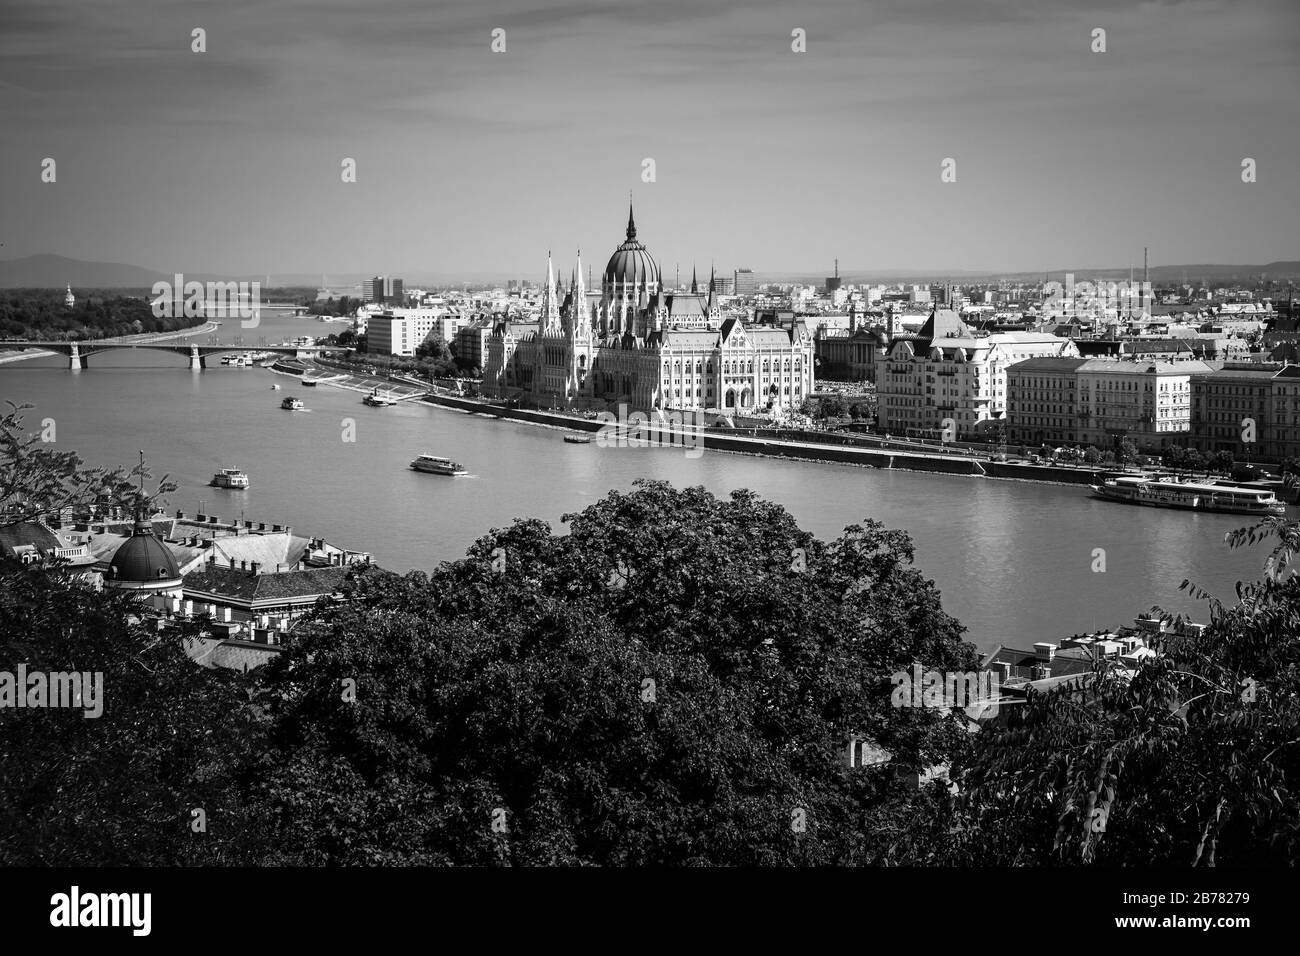 Pest Parlament Black and White image Budapest Stock Photo